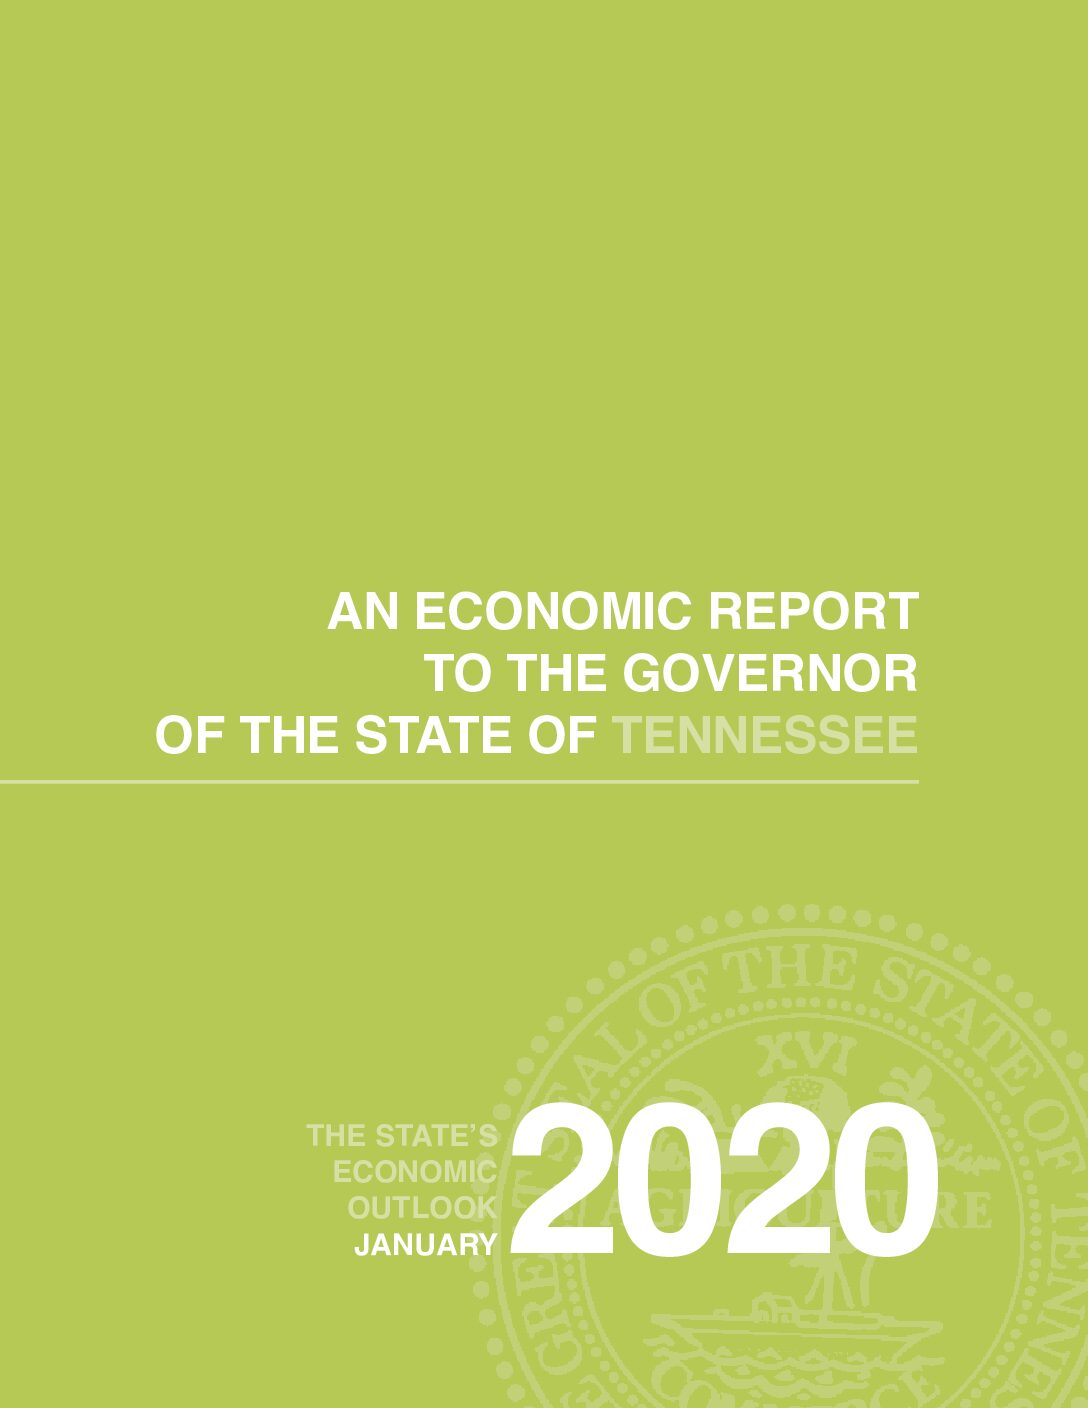 Economic Report To the Governor 2020